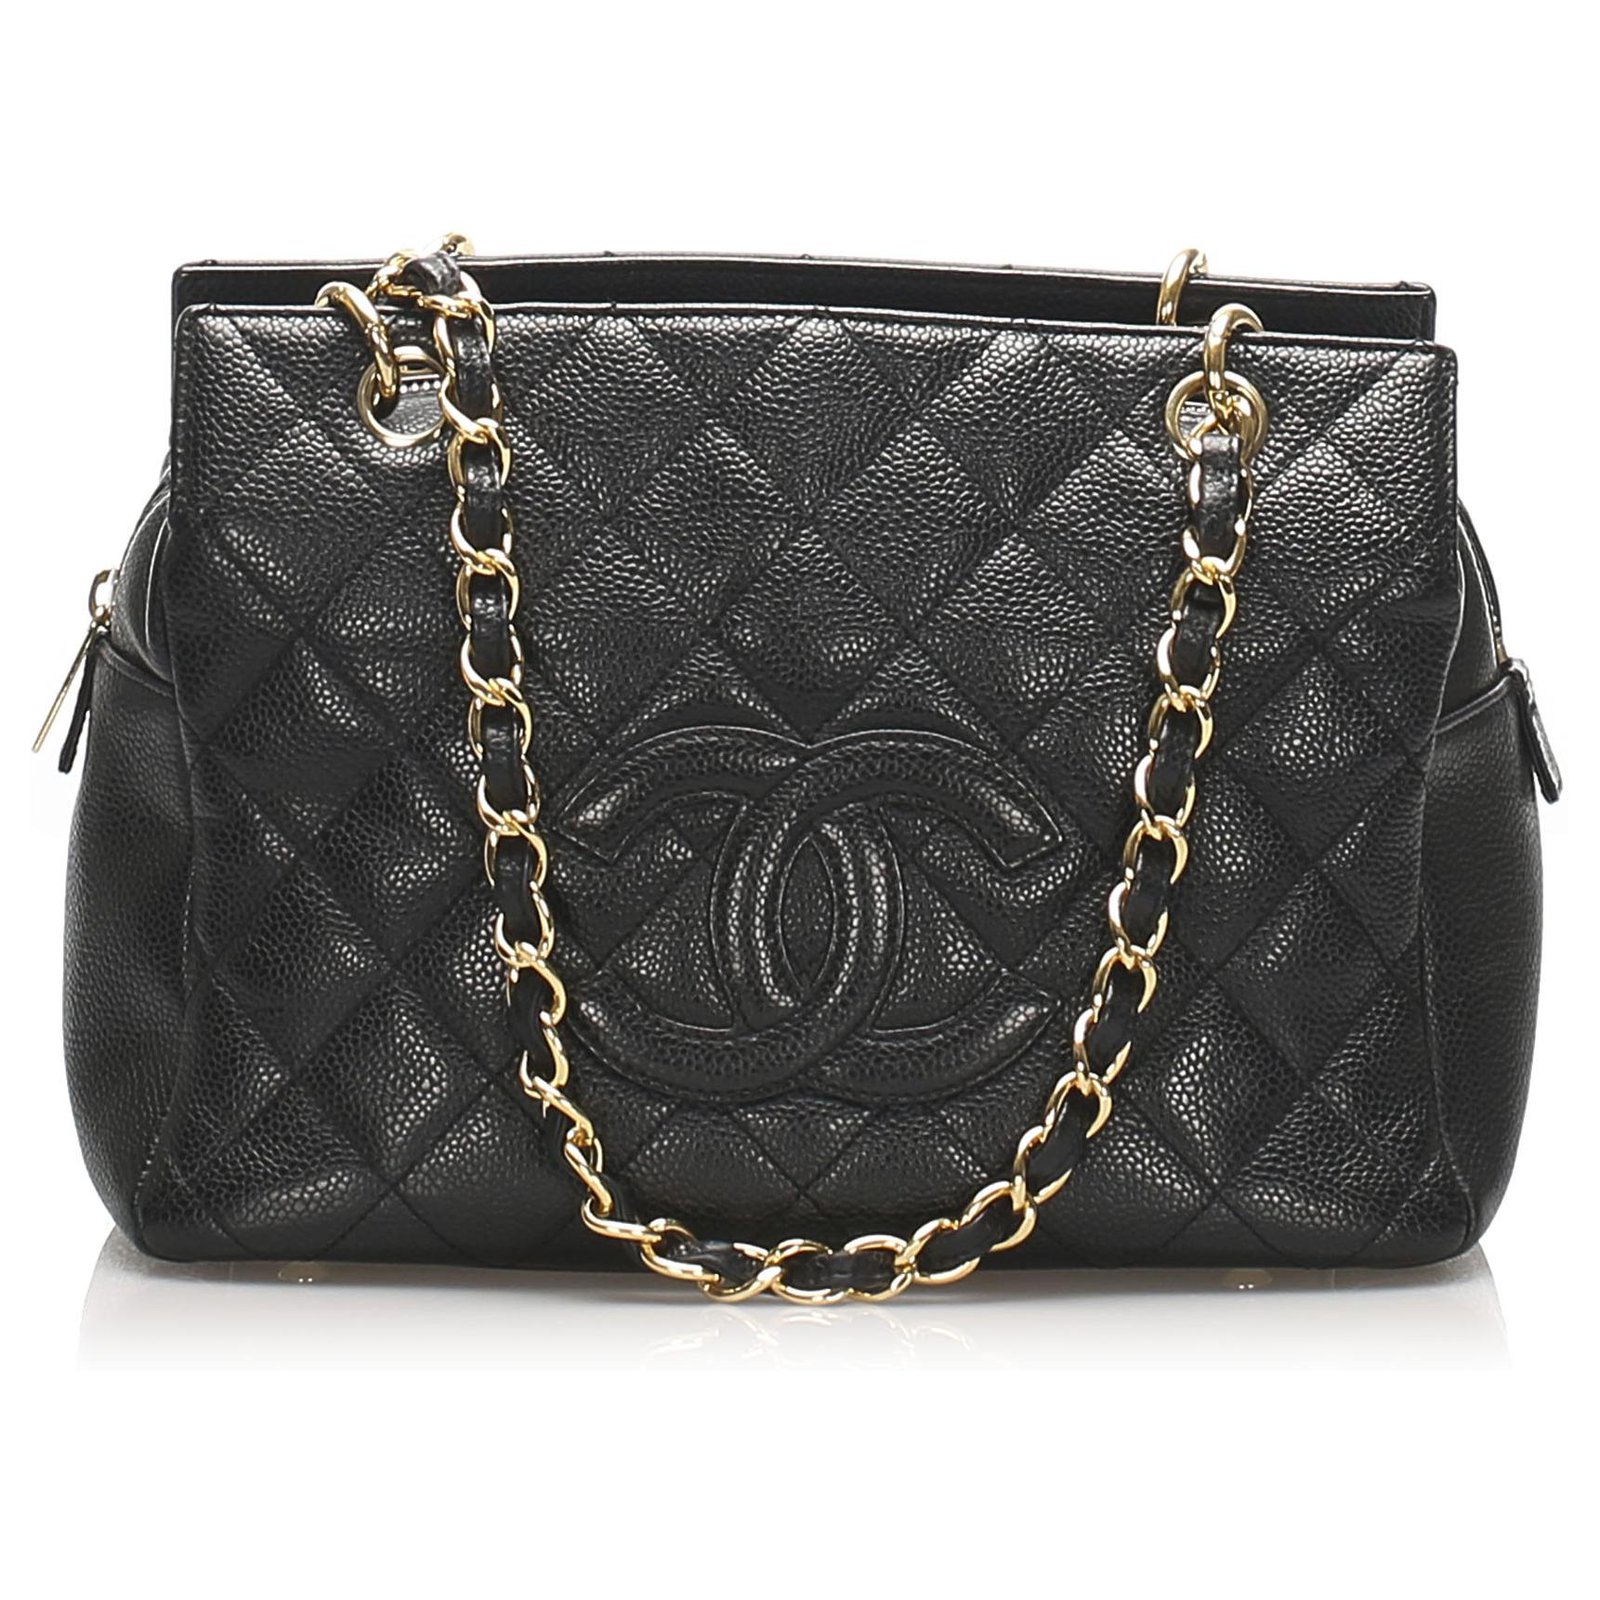 Chanel Black Caviar Petite Timeless Shopping Tote Bag Leather ref